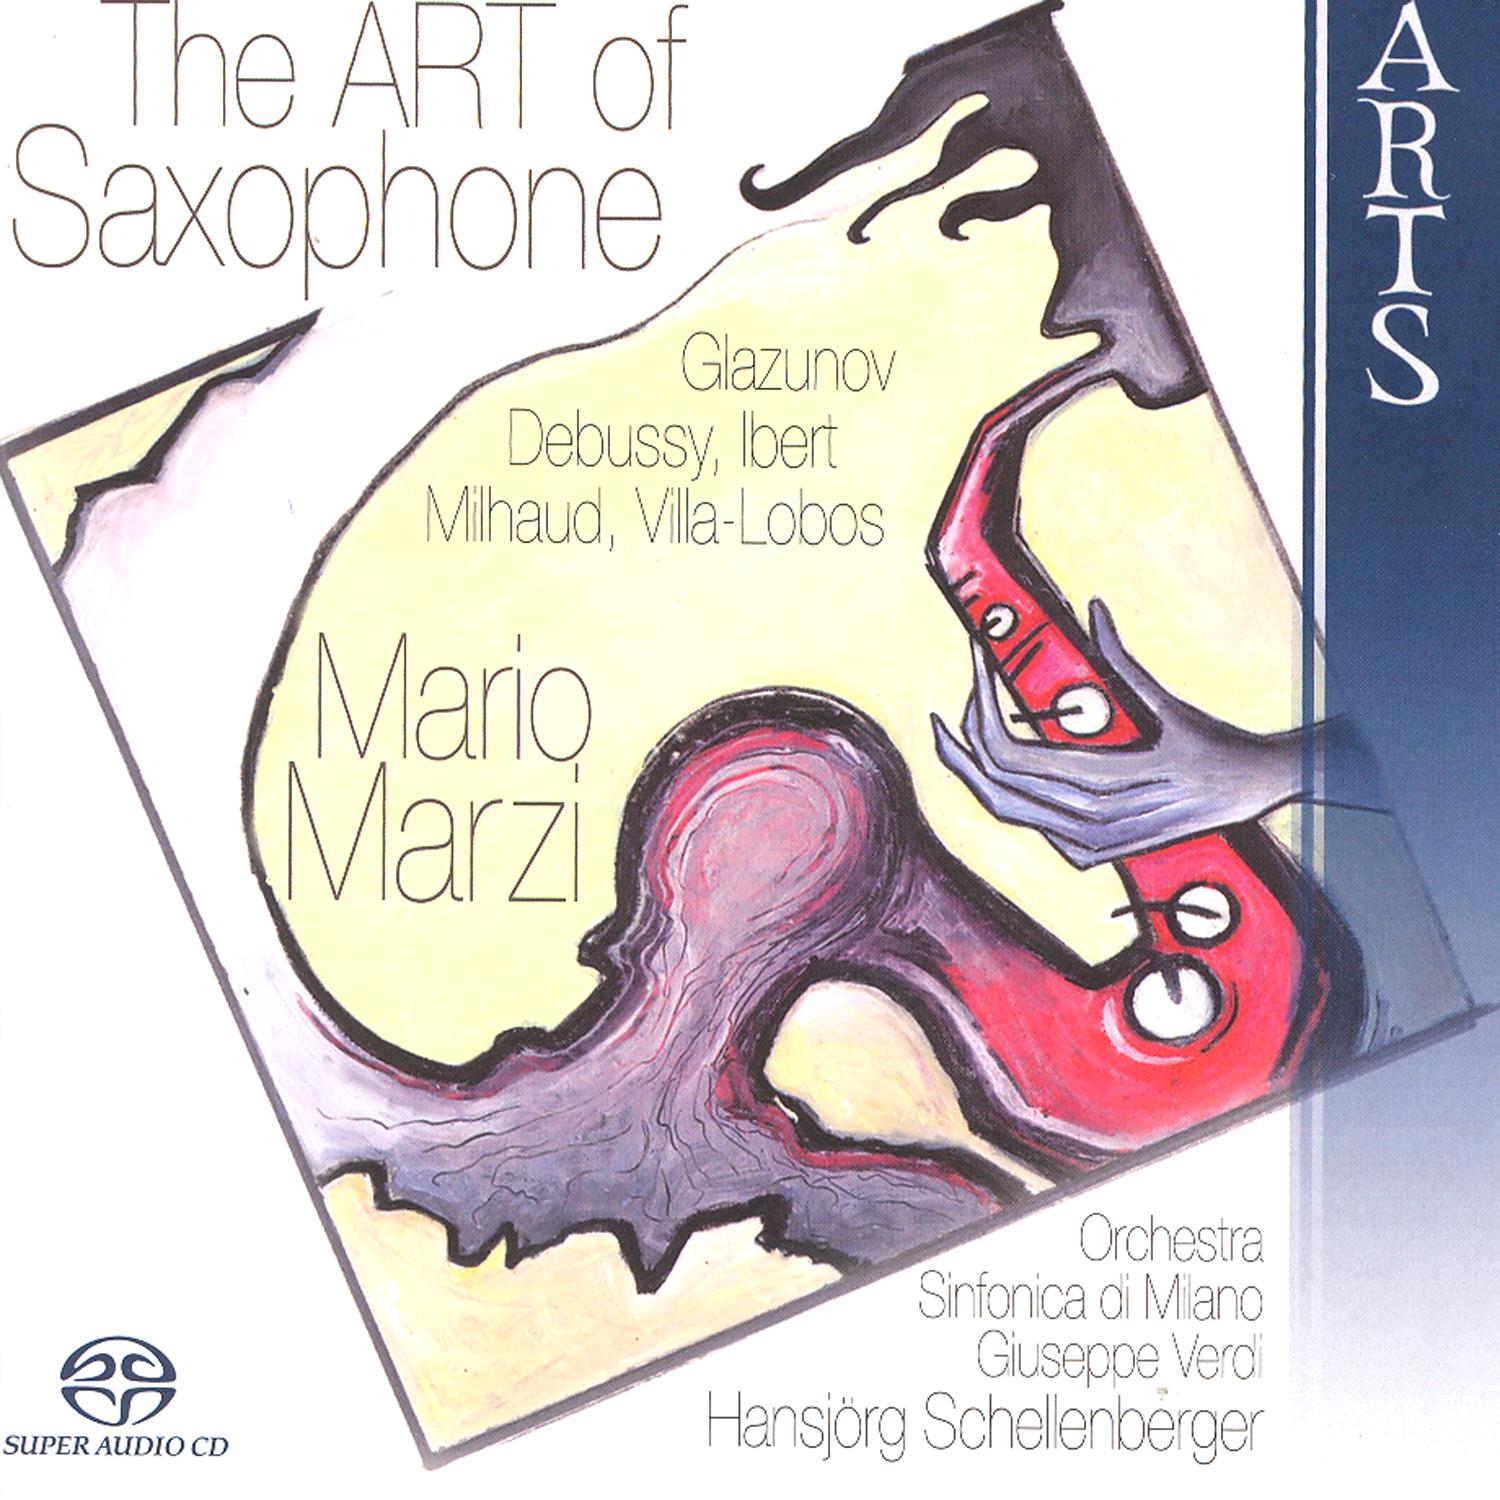 Scaramouche. Suite for saxophone and orchestra: Brazileira